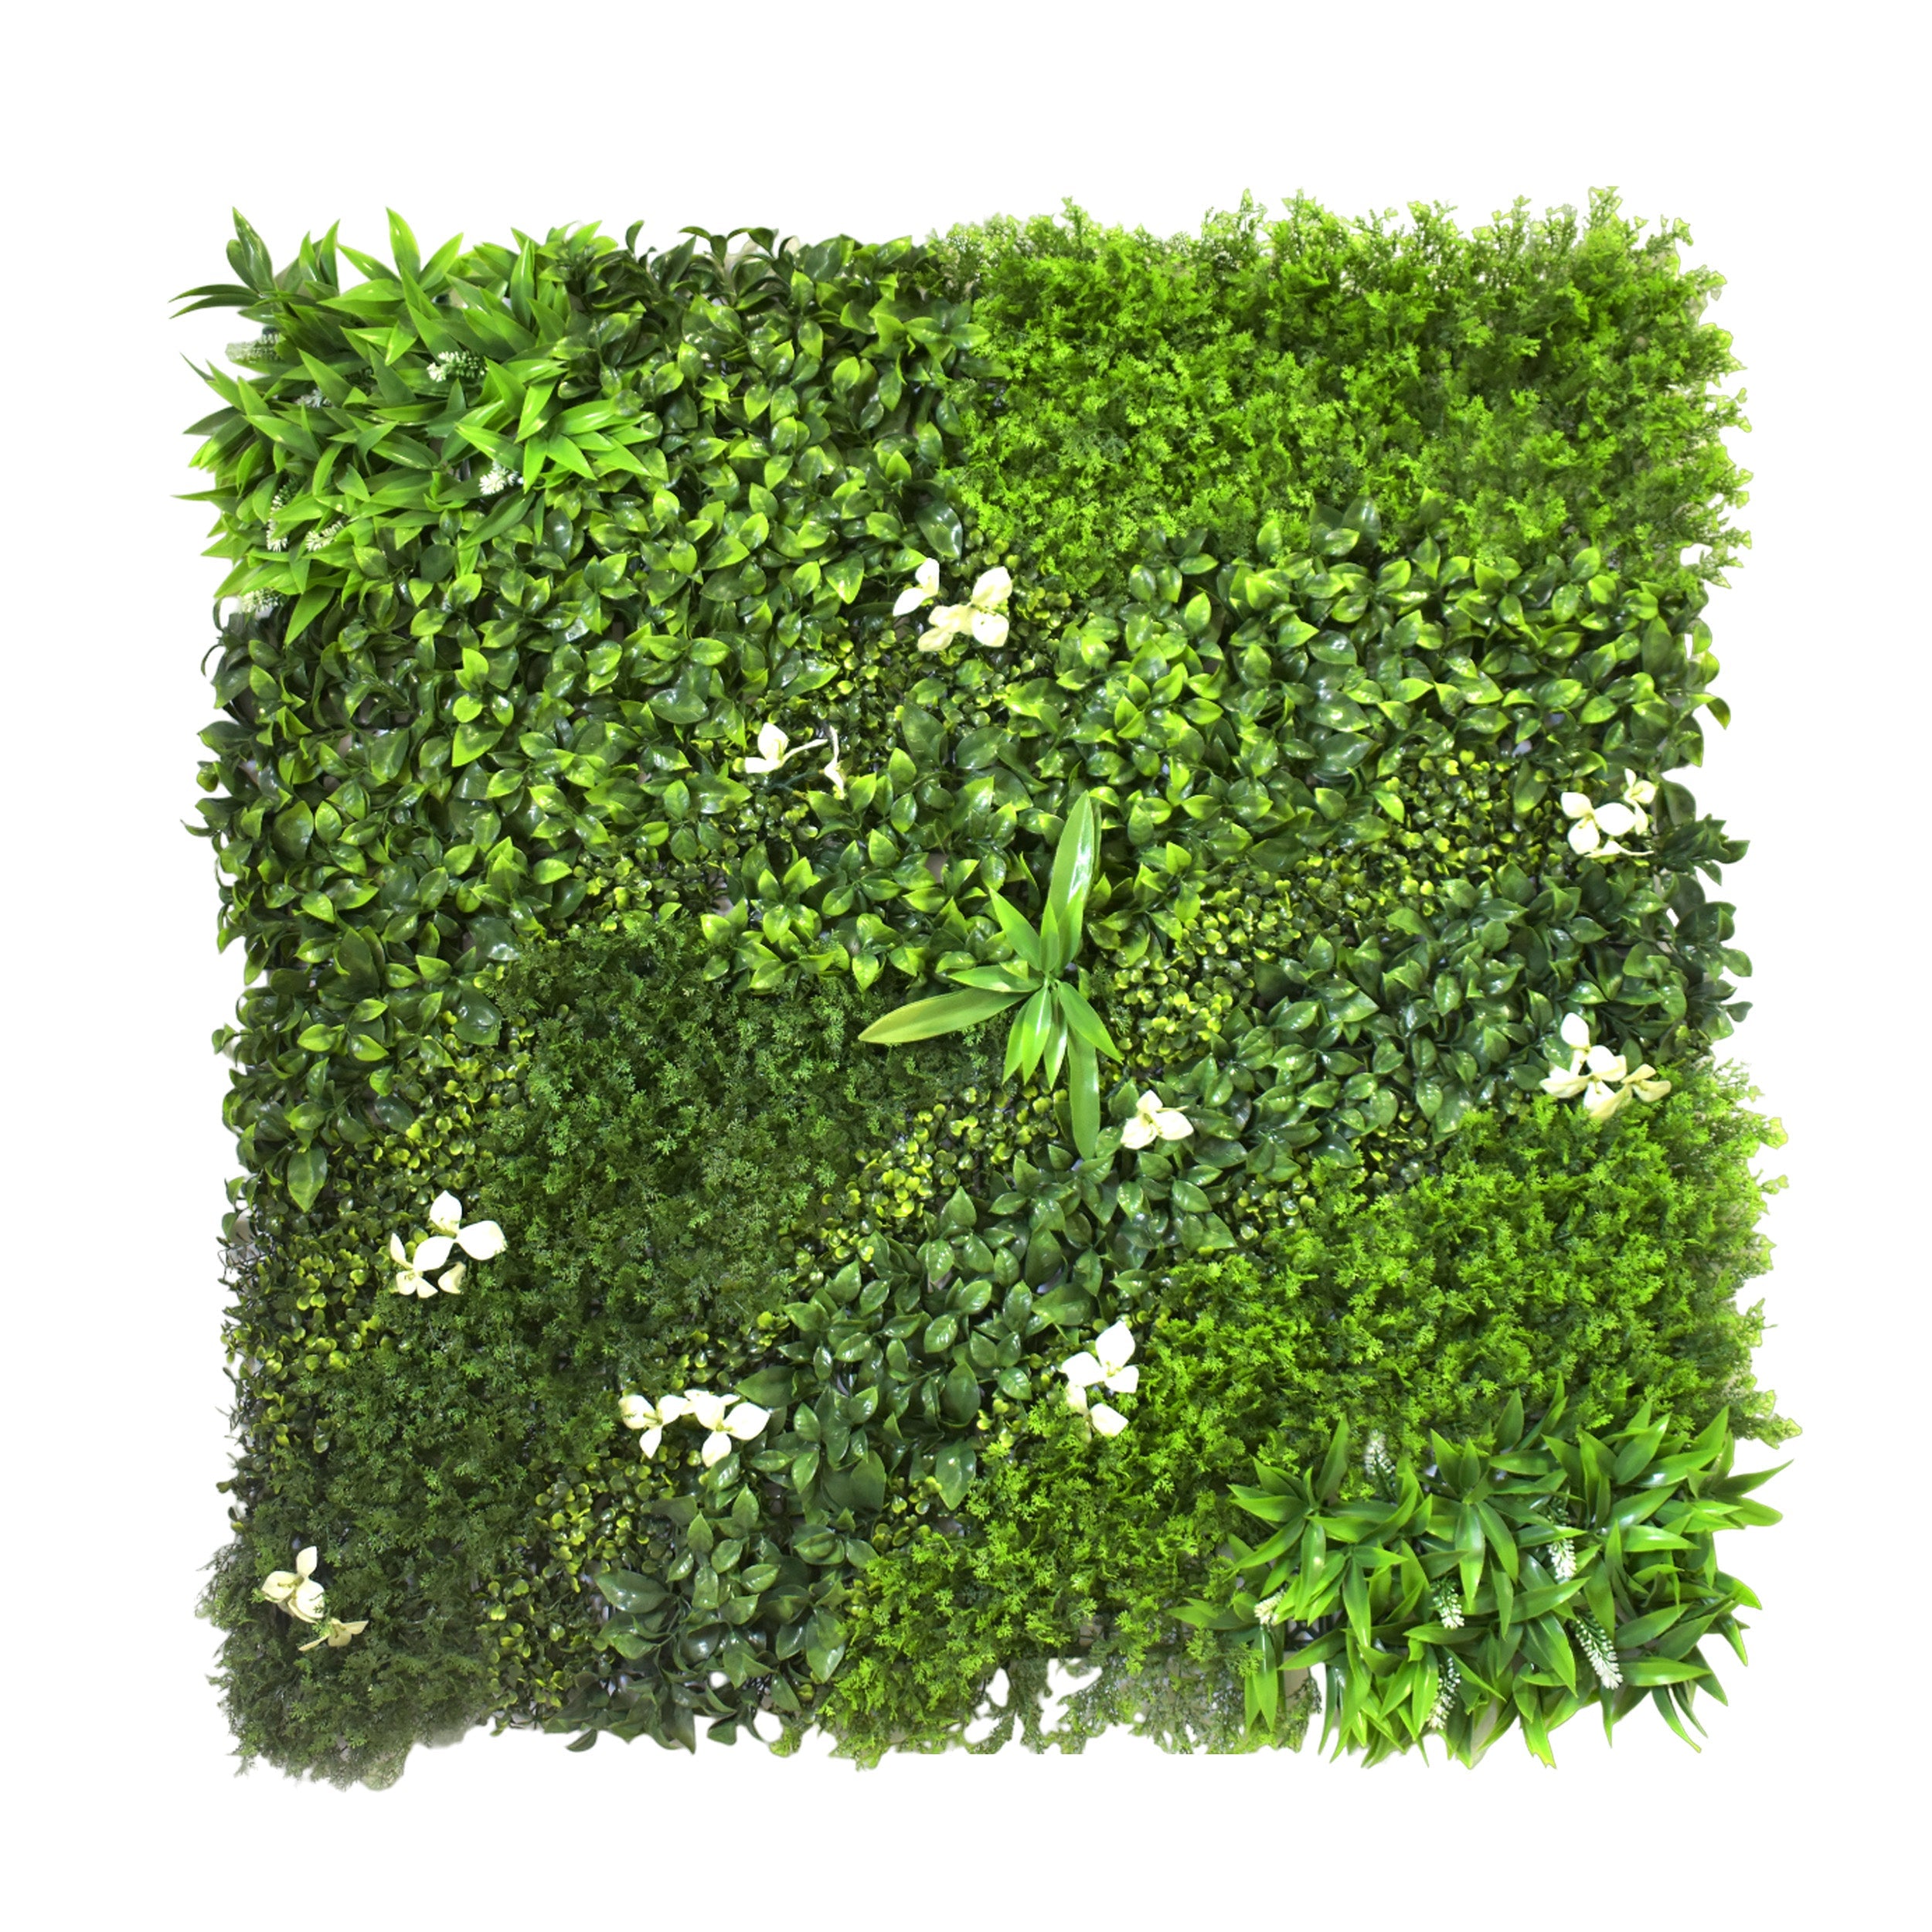 Aavana Greens Artificial Vertical Garden Wall Panel 100X100 CM For Home & Office Decoration 100% UV Indoor And Outdoor Use Option 19